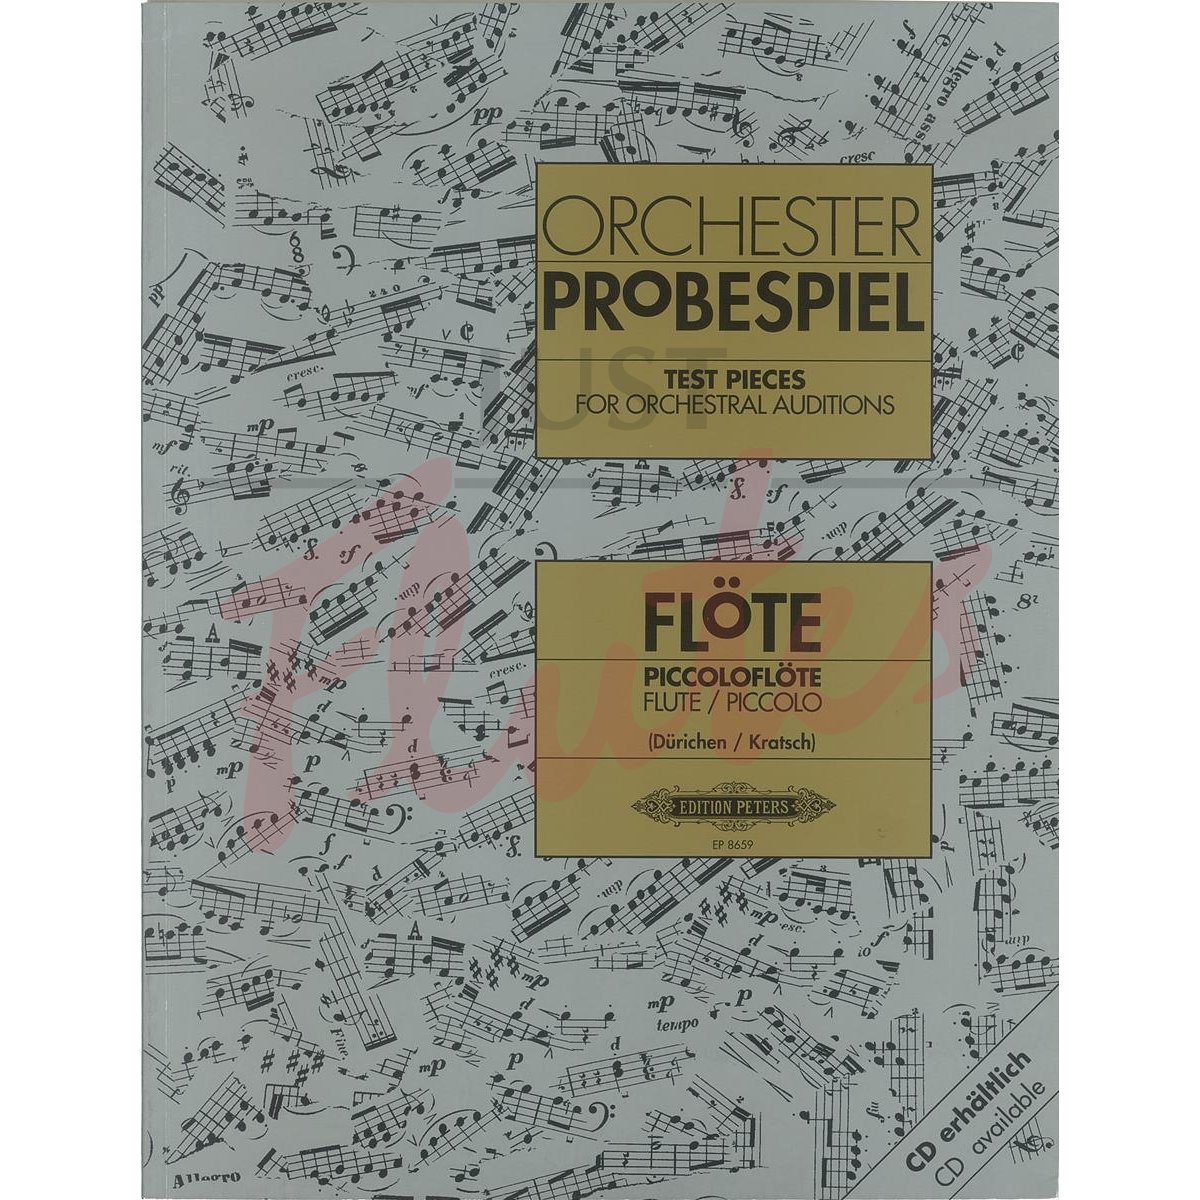 Orchester-Probespiel: Test Pieces for Orchestral Auditions for Flute and Piccolo